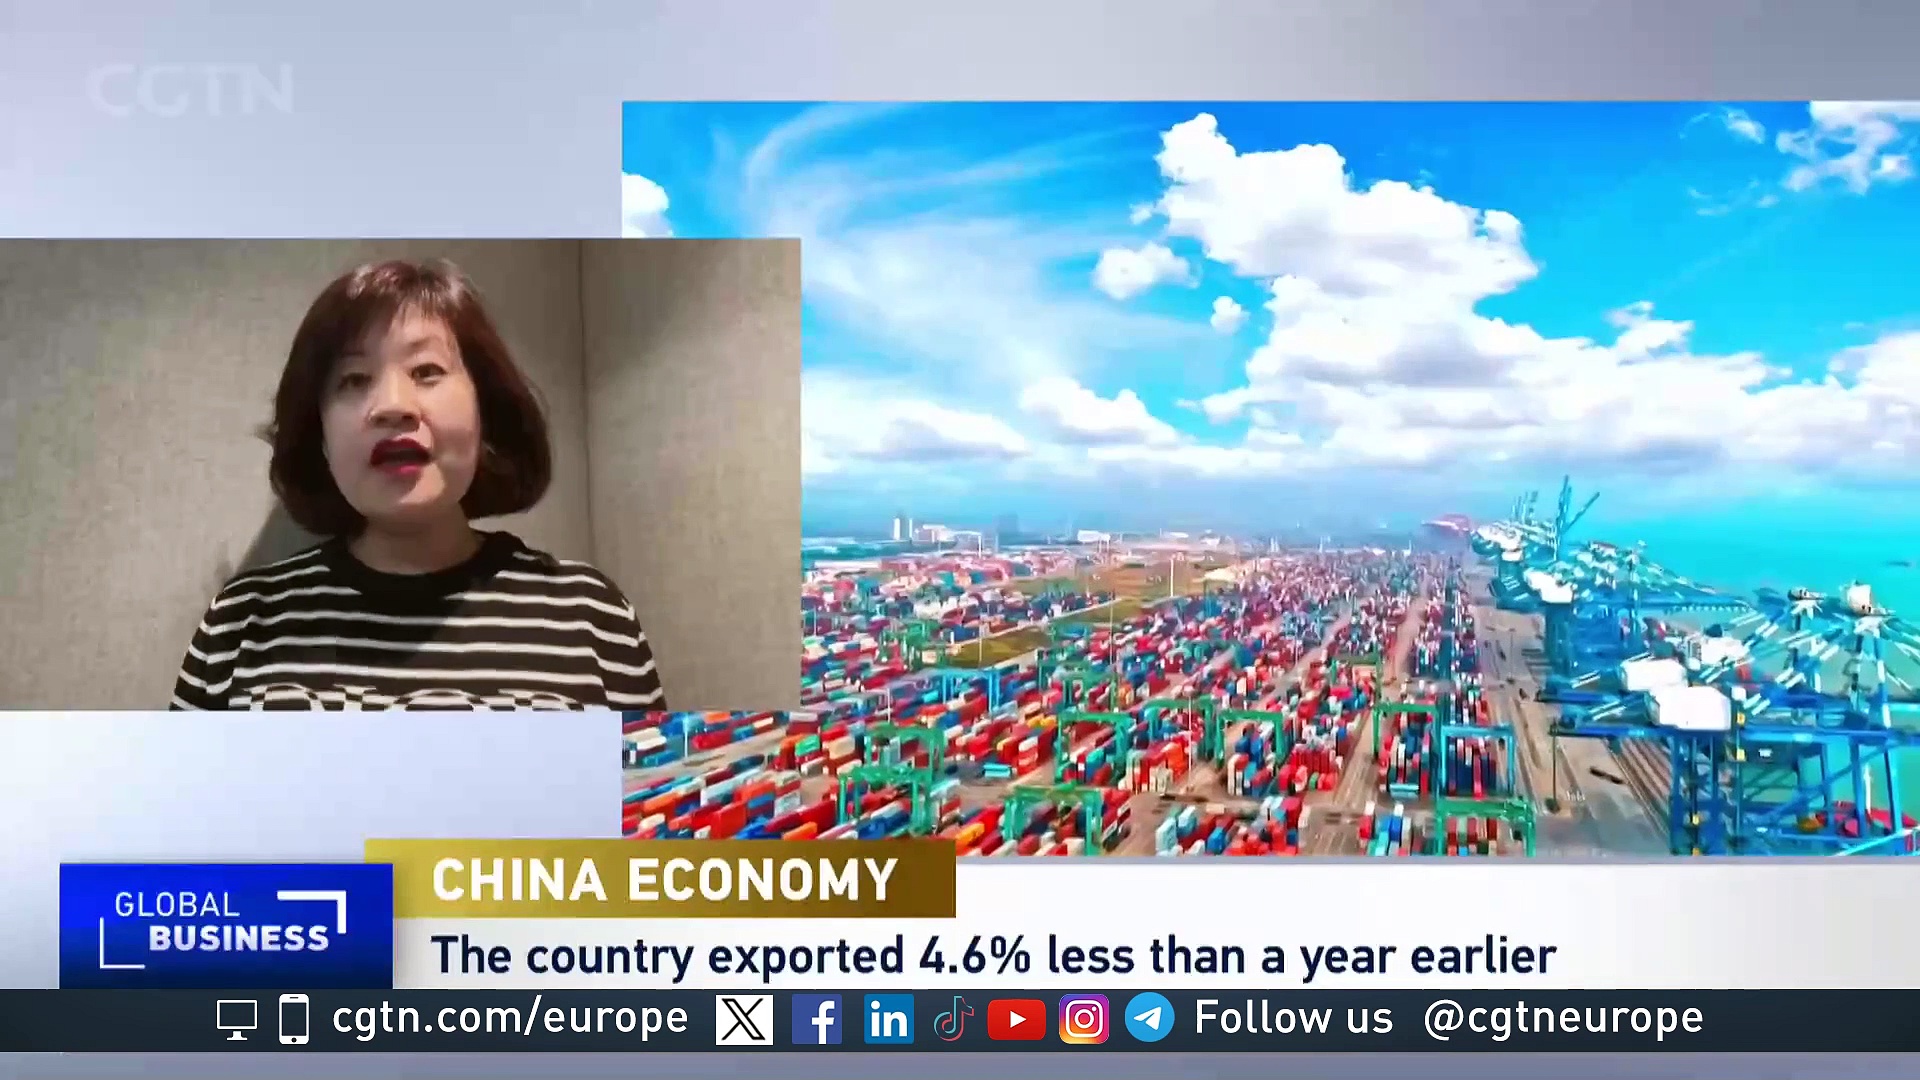 “China is rebalancing where and what to export.”